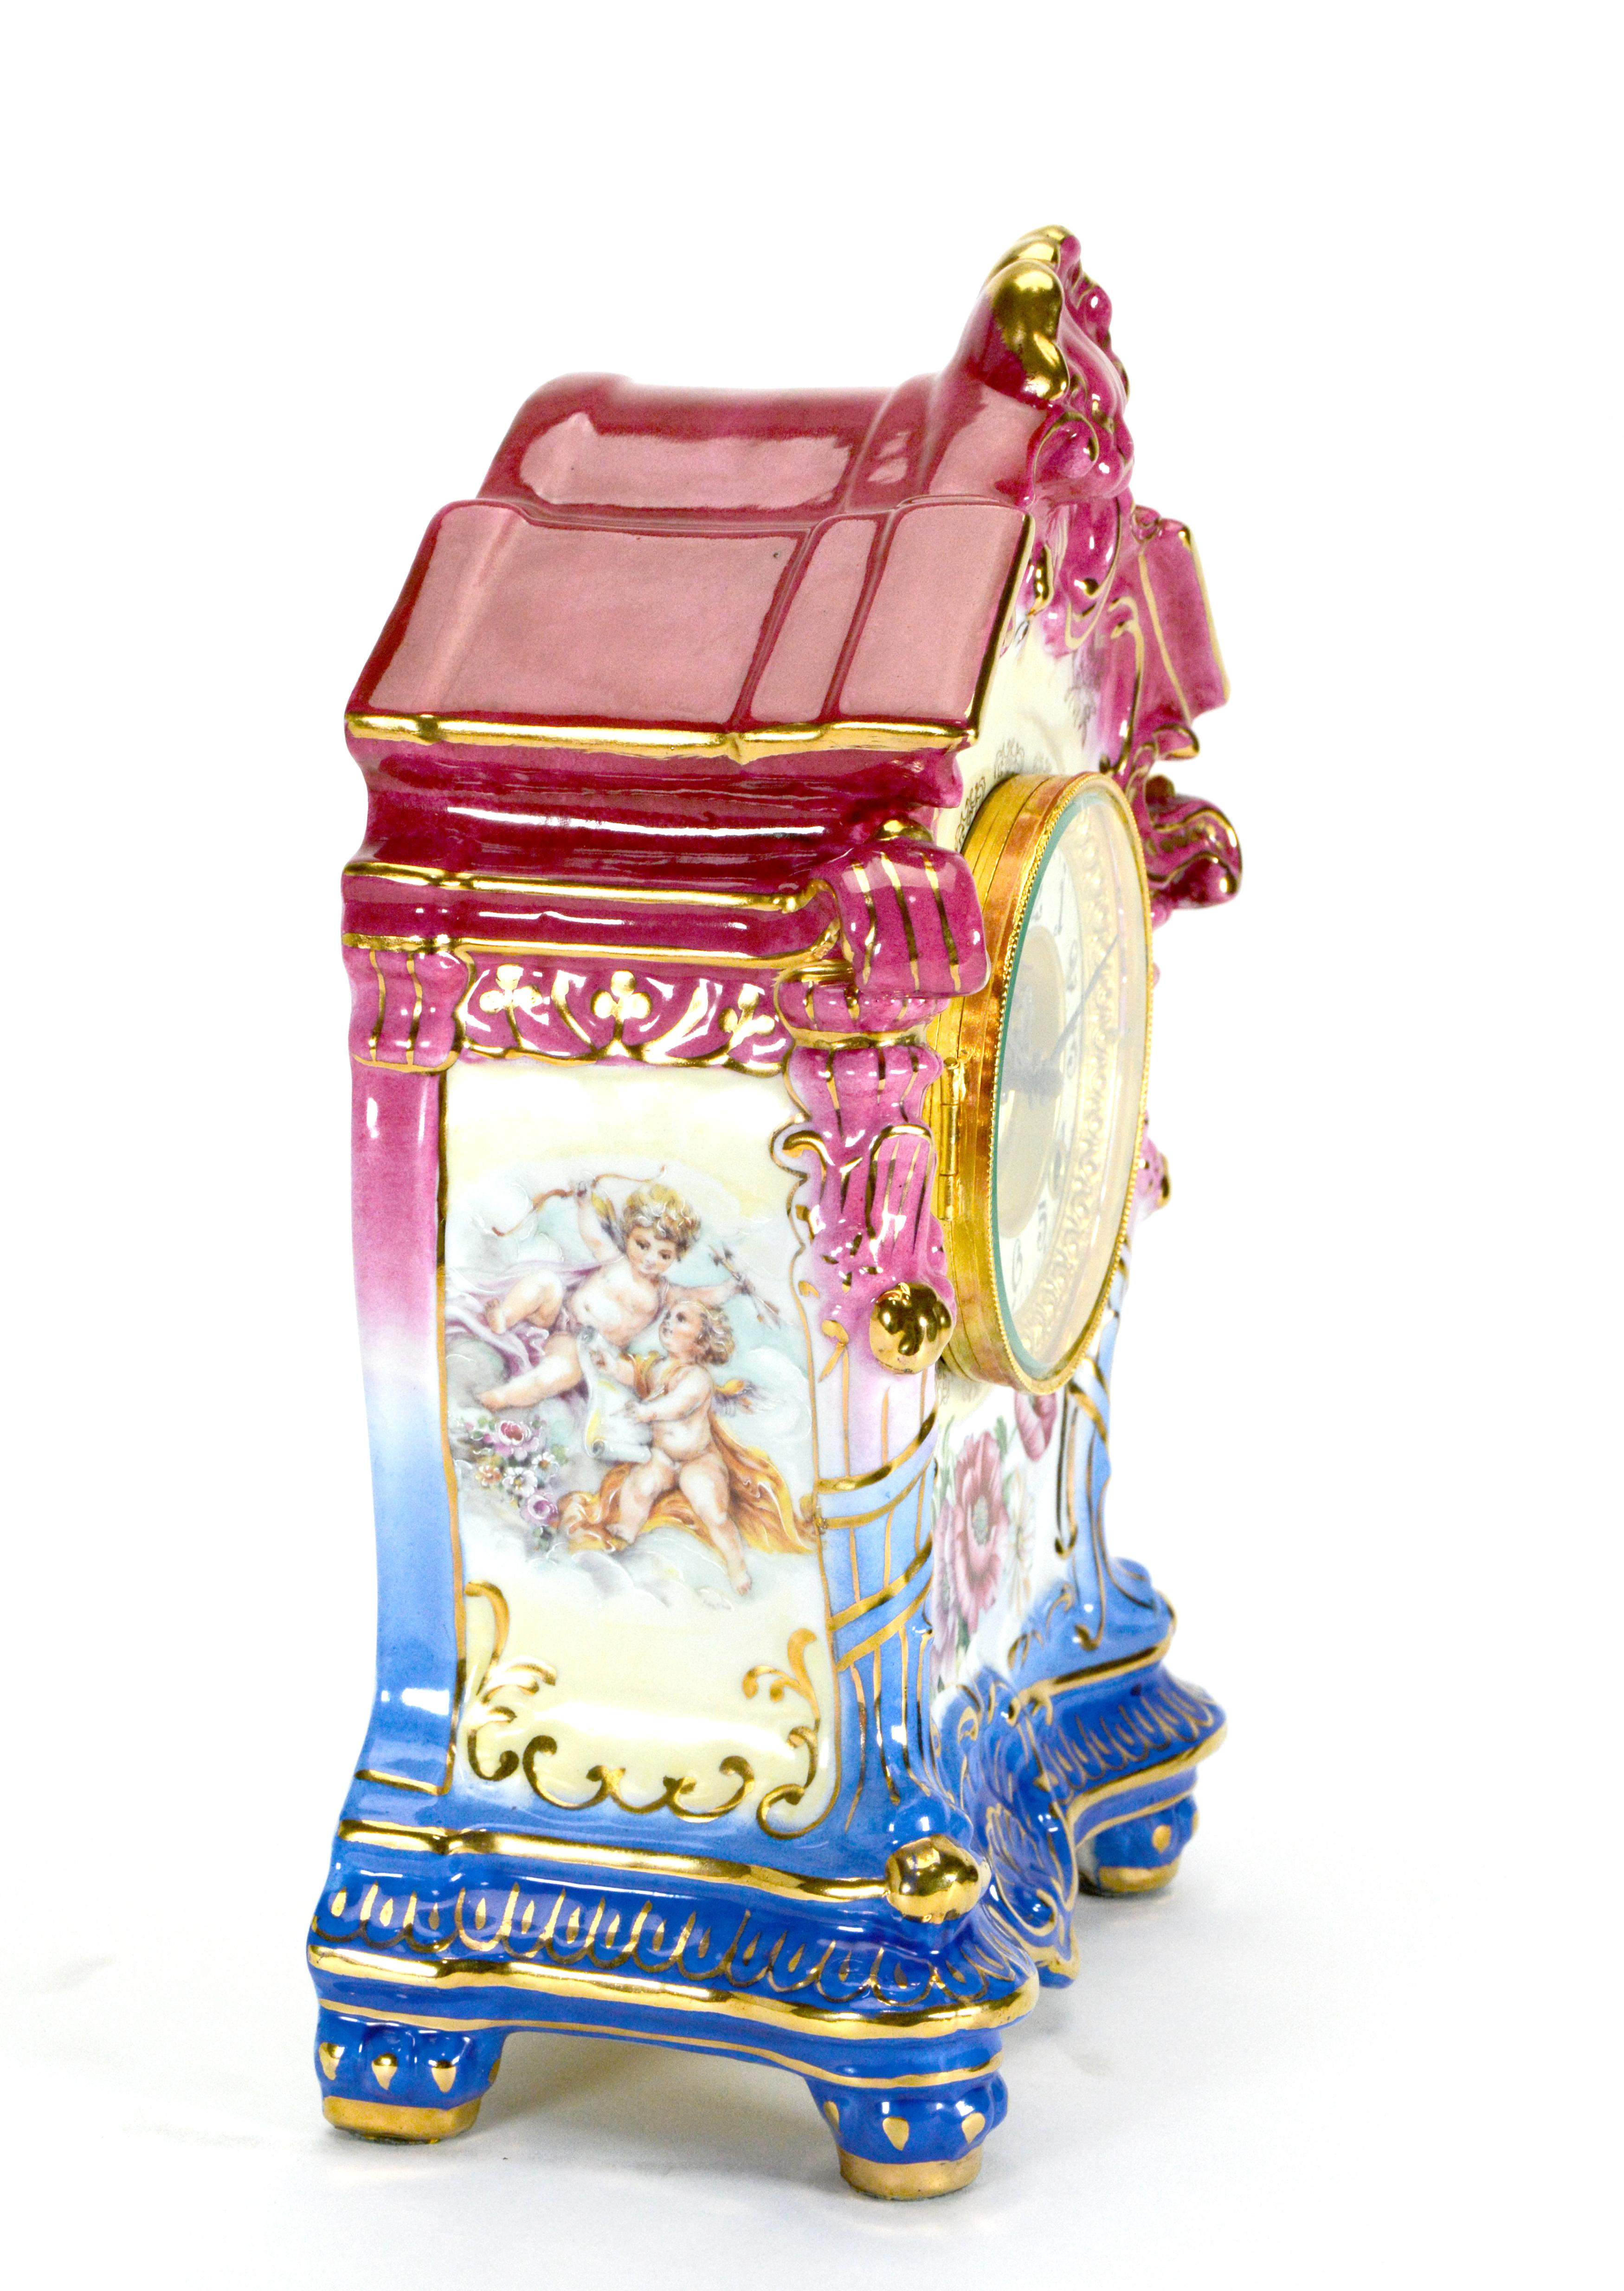 This is one of the most beautiful porcelain clocks. It has beveled glass bezel over the 2 piece porcelain dial. The entire clock case is made of real porcelain, not those cheap clay cases. It's hand painted with colorful flowers. This clock features